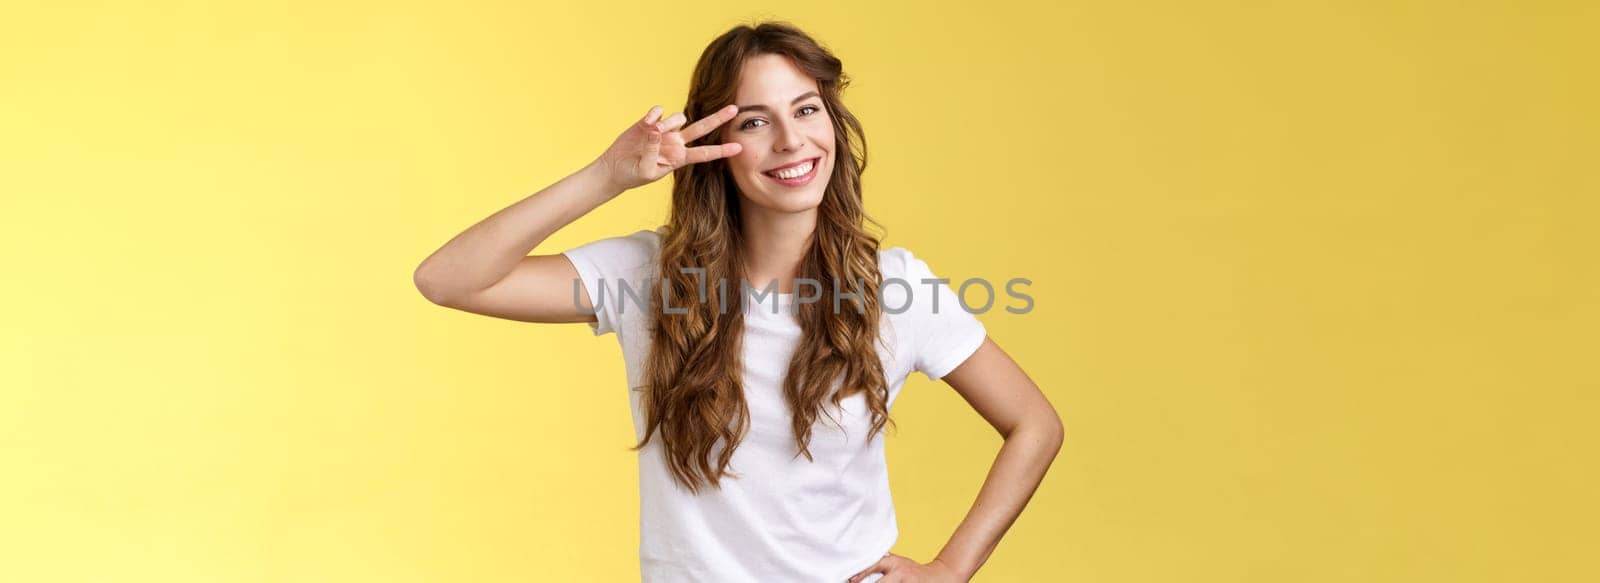 Positive outgoing enthusiastic good-looking woman having fun enjoy weekend summer vacation travel show peace sign victory gesture on eye tilt head having fun smiling broadly yellow background. Lifestyle.